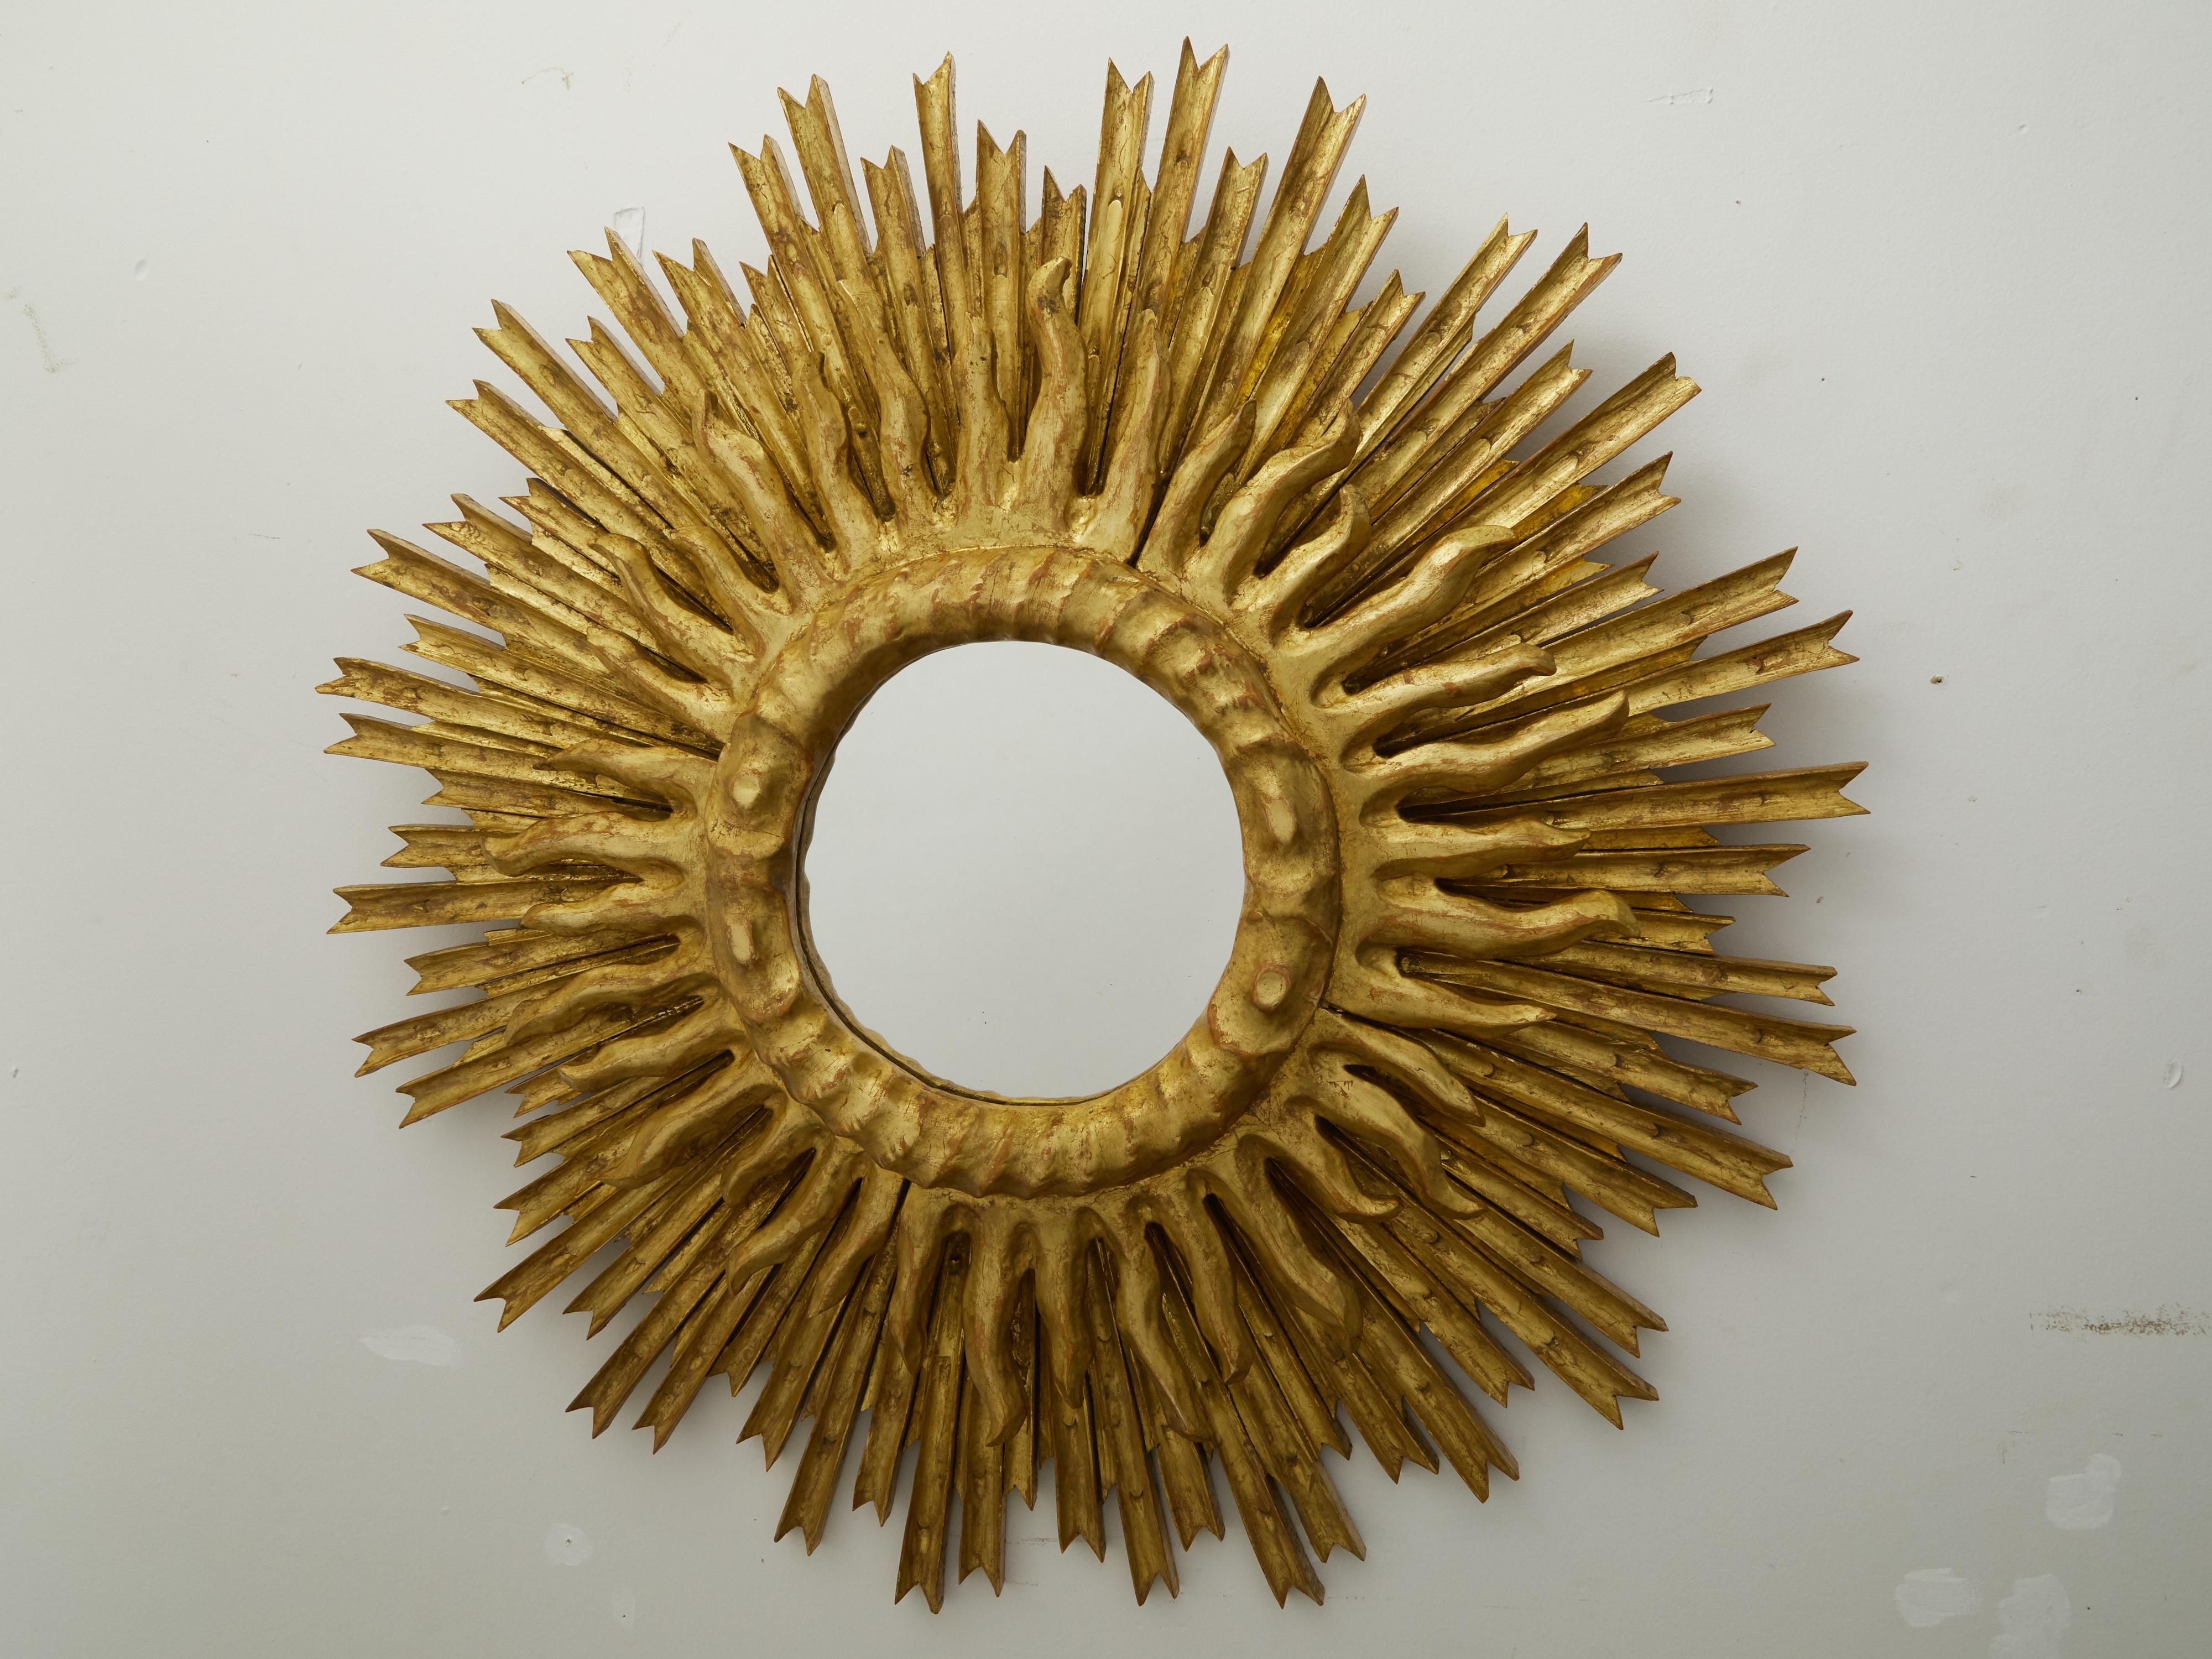 A vintage French giltwood sunburst mirror from the mid-20th century, with layered rays and small mirror plate. Created in France during the midcentury period, this sunburst mirror features a central mirror plate surrounded by a cloudy frame resting